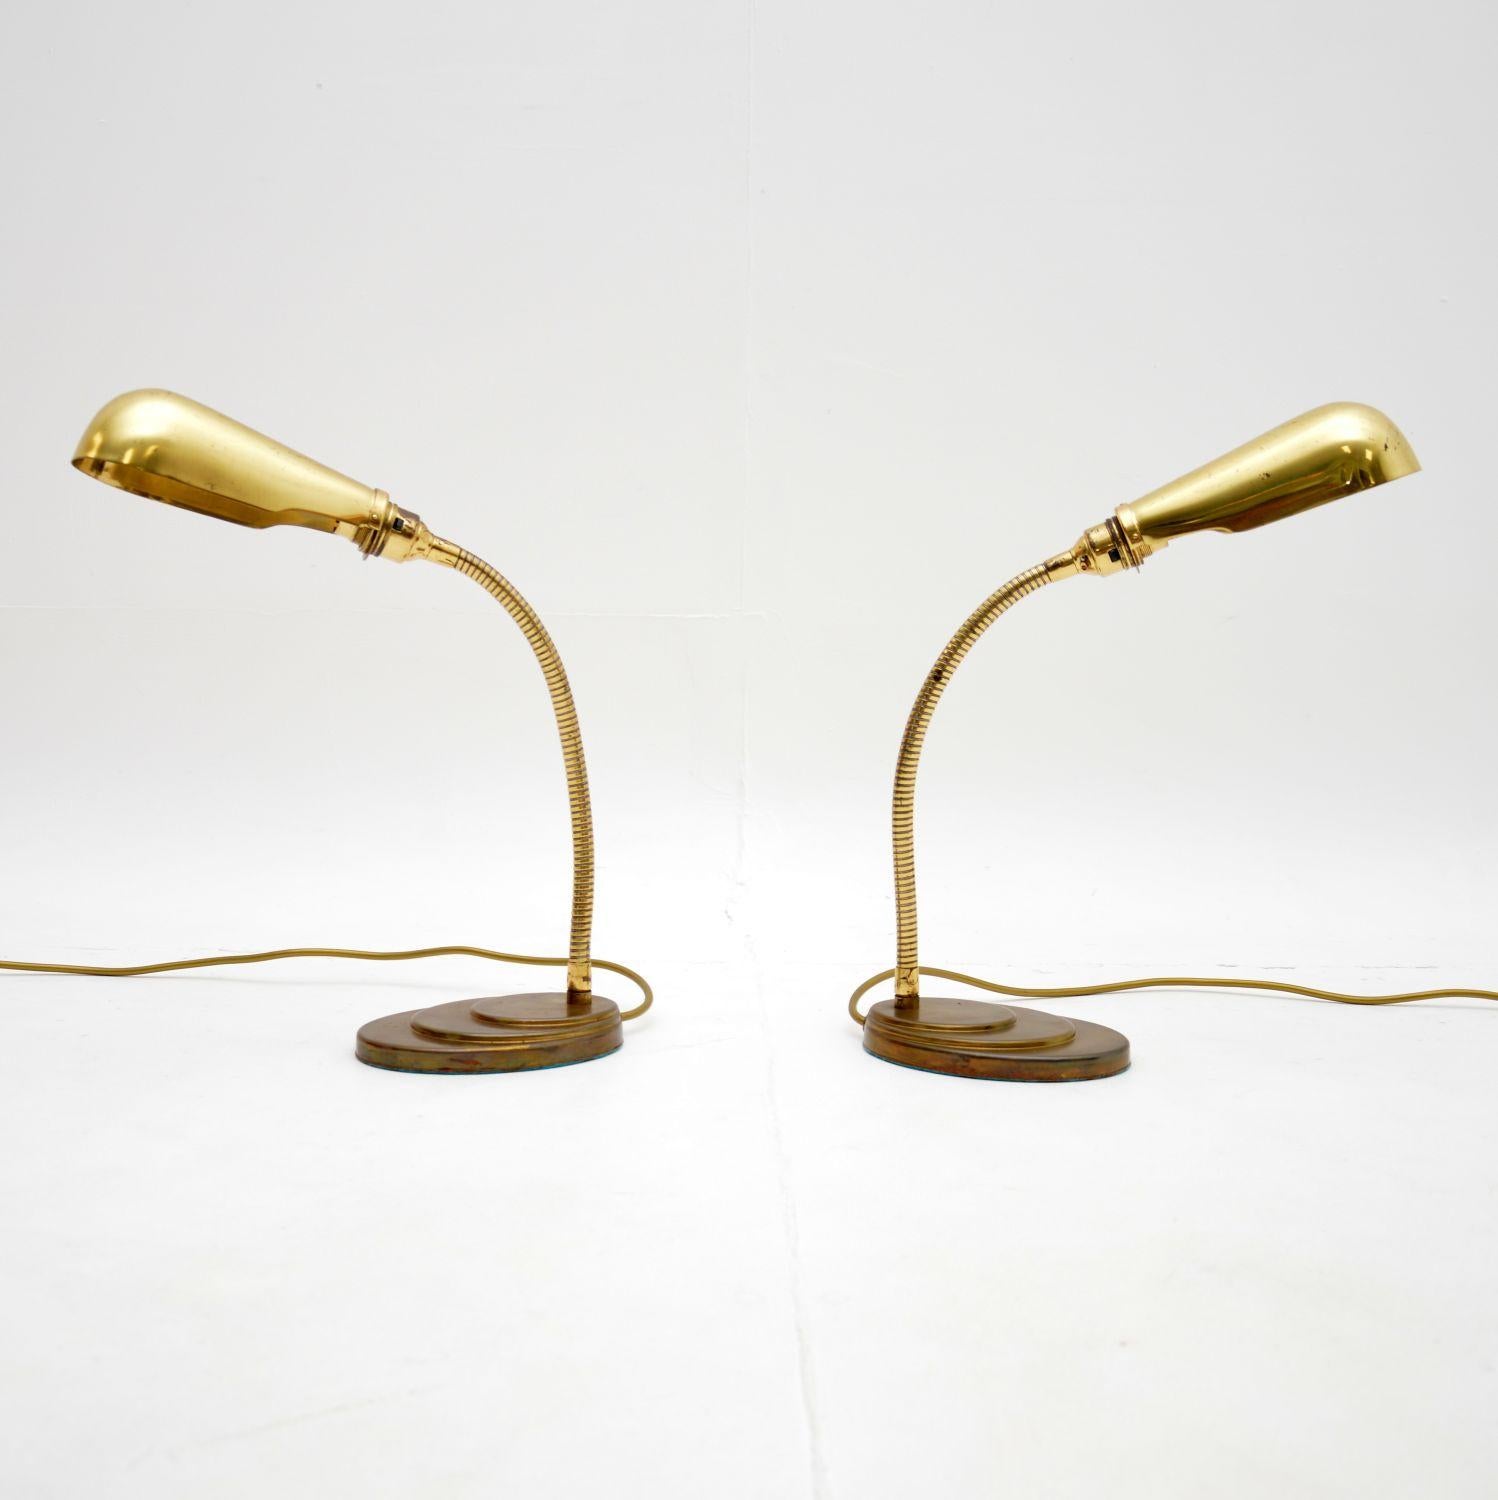 A wonderful pair of vintage brass goose neck table lamps. They were made in England, they date from the 1960-70’s.

The quality is fantastic, they are a lovely size and have a very useful design. The necks are adjustable, the shades also